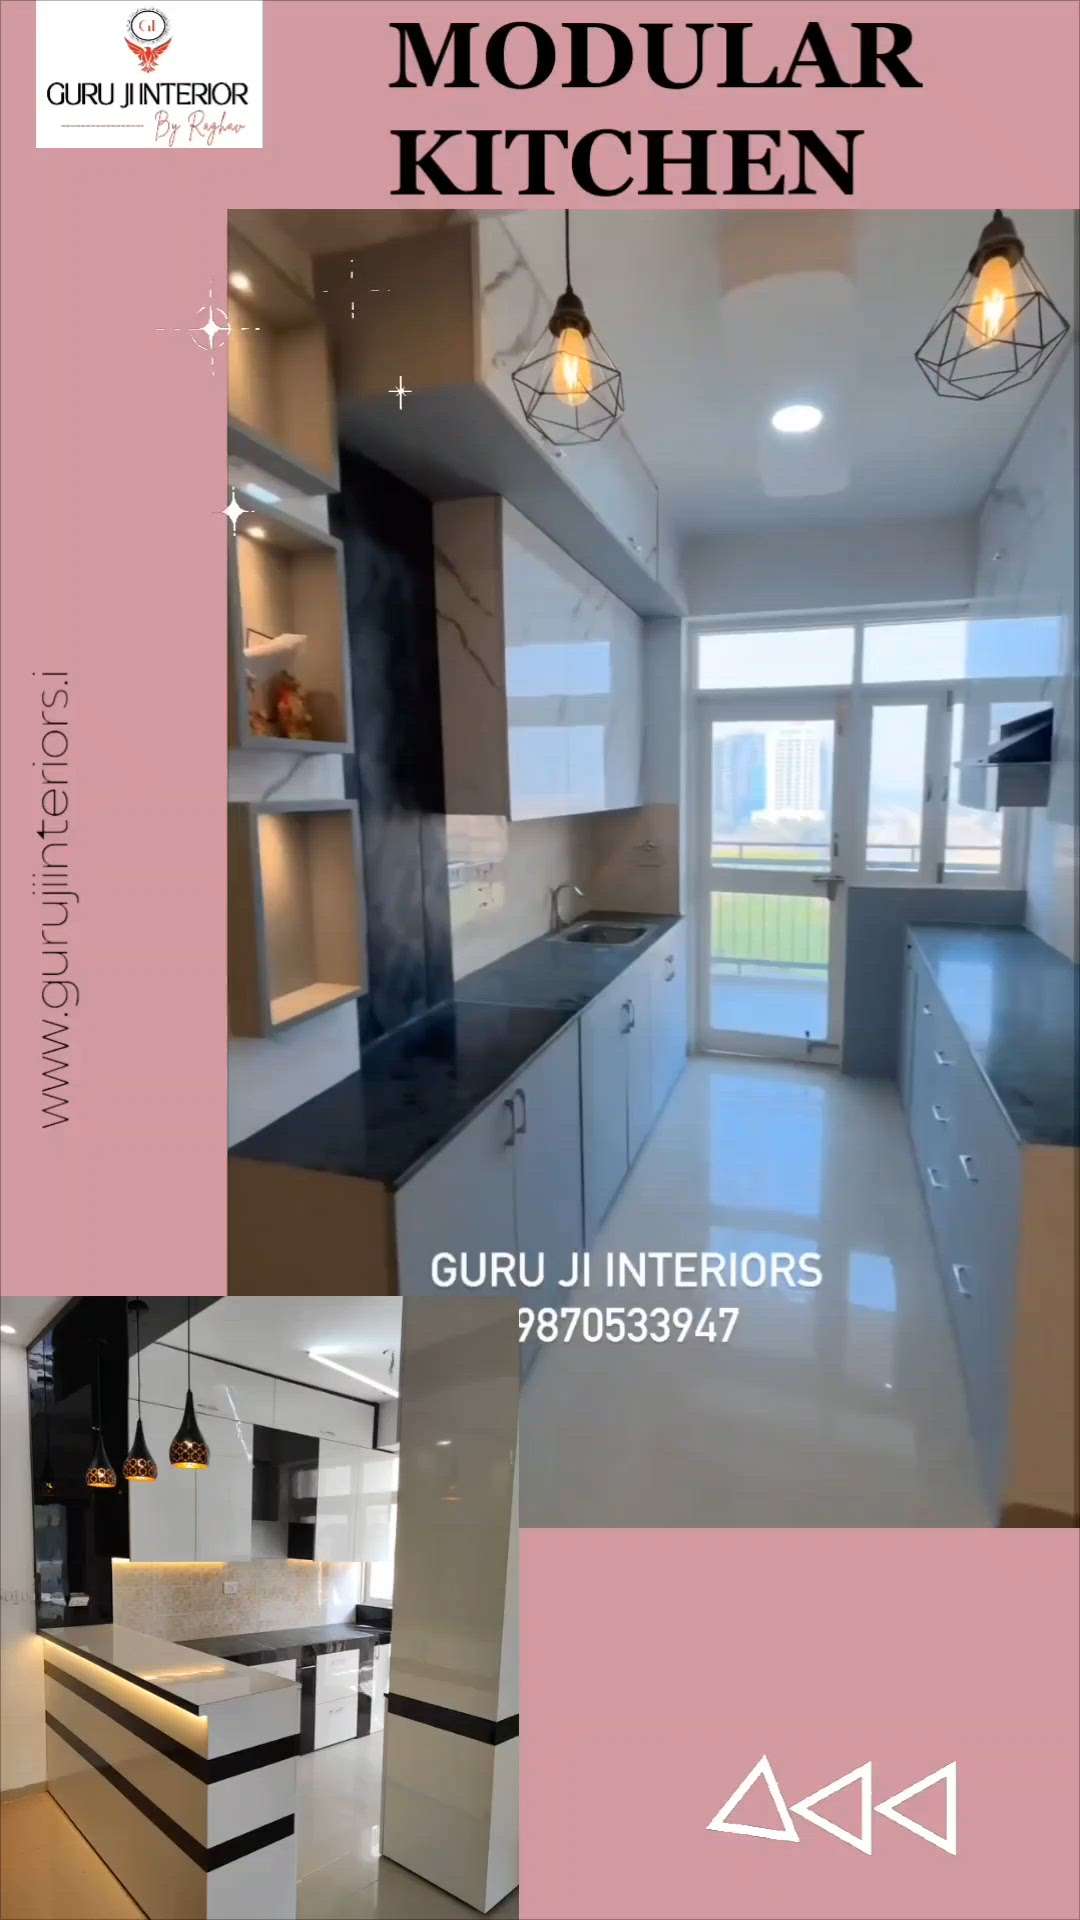 Modular kitchen 
@  Get High Quality and Modern Interior Design For Your Dream Home - At Affordable Price ✨
.
Guru ji interior
By Raghav
Call - 9870533947 
#gurujiinteriors
#Interiordesign #luxuryhomes
#PerfectInterior #modularkitchen